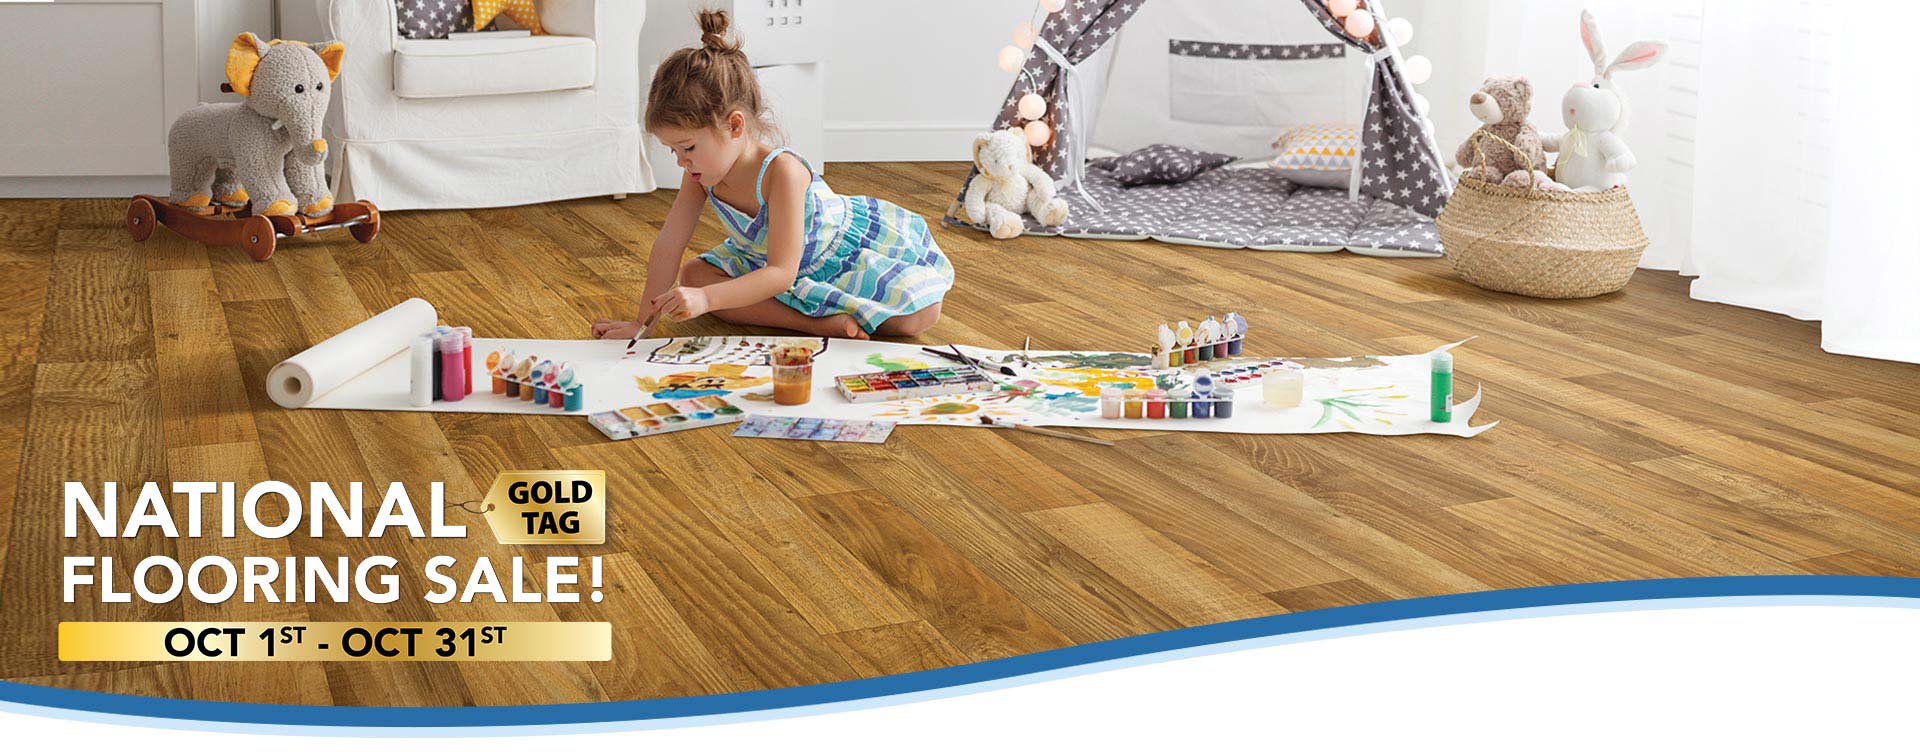 National Gold Tag Flooring Sale! Oct 1st-31st | Carpet • Hardwood • Laminate • Luxury Vinyl • Tile | Our Biggest Sale of the Year!